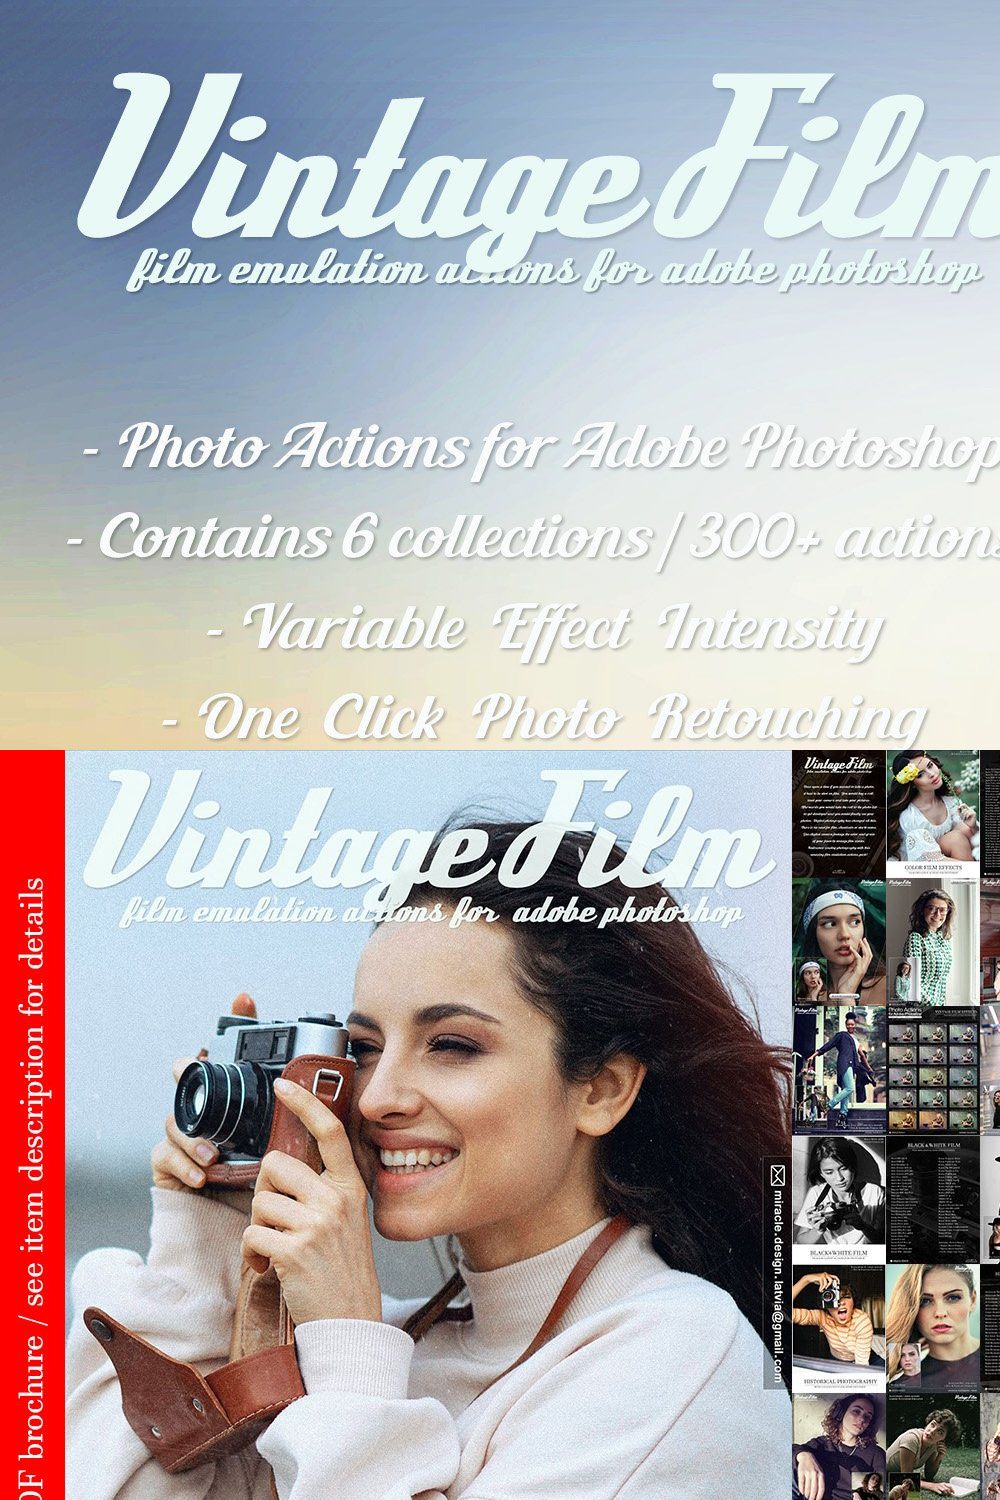 Actions for Photoshop / Vintage Film pinterest preview image.